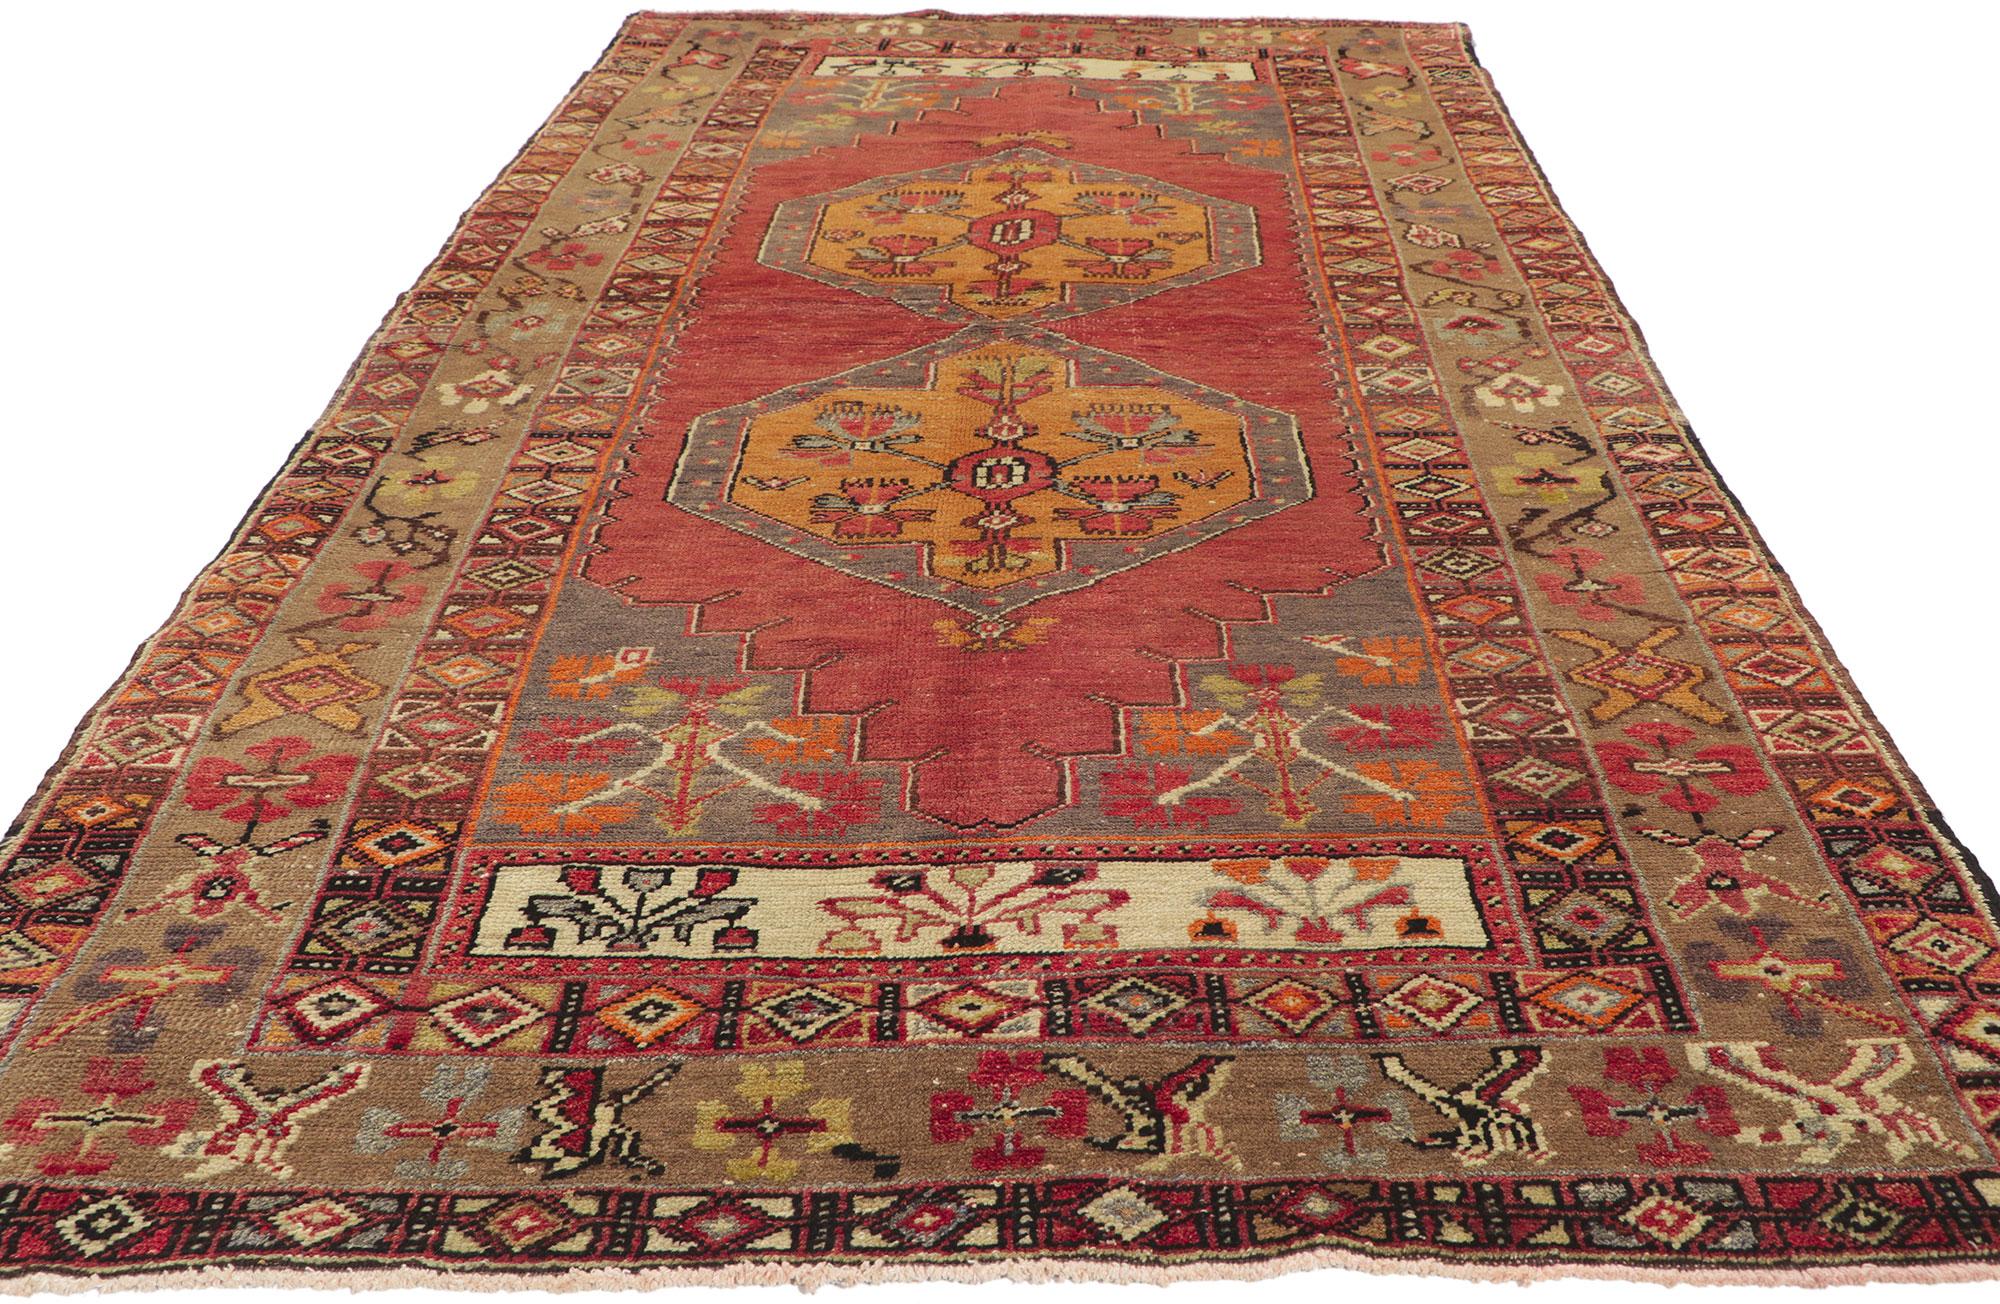 20th Century Vintage Turkish Oushak Rug Runner with Rustic Earth-Tone Colors For Sale